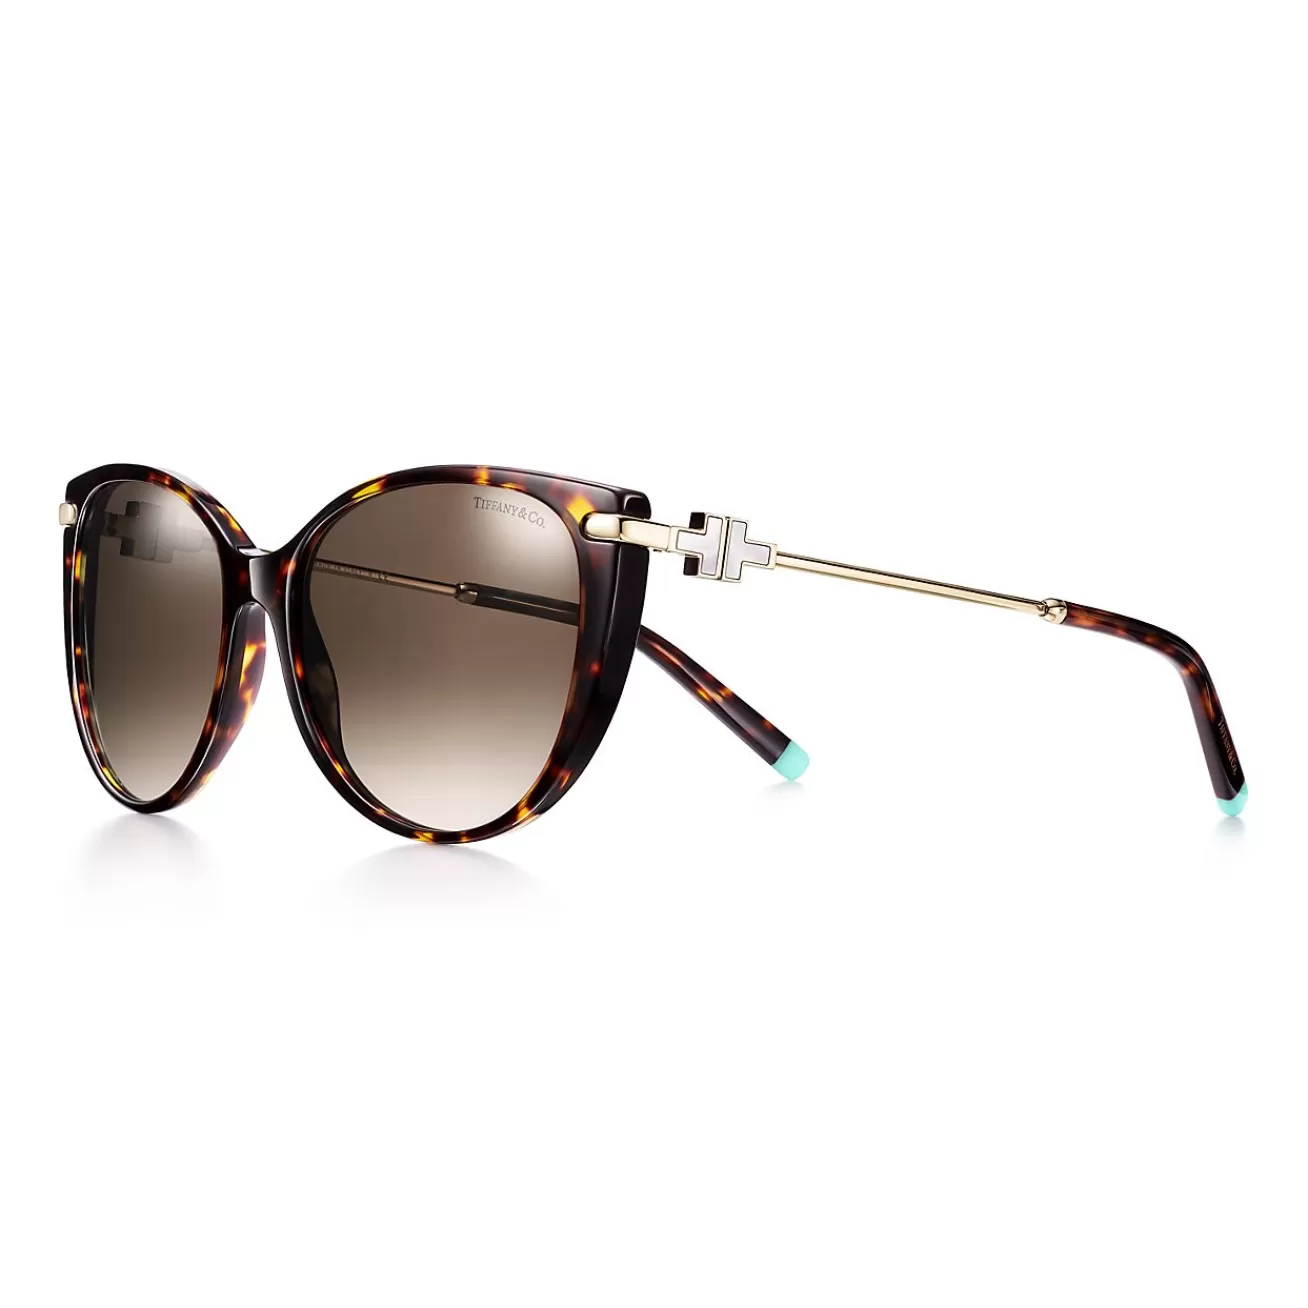 Tiffany & Co. Tiffany T Cat Eye Sunglasses in Tortoise Acetate with Mother-of-pearl | ^ Tiffany T | Sunglasses